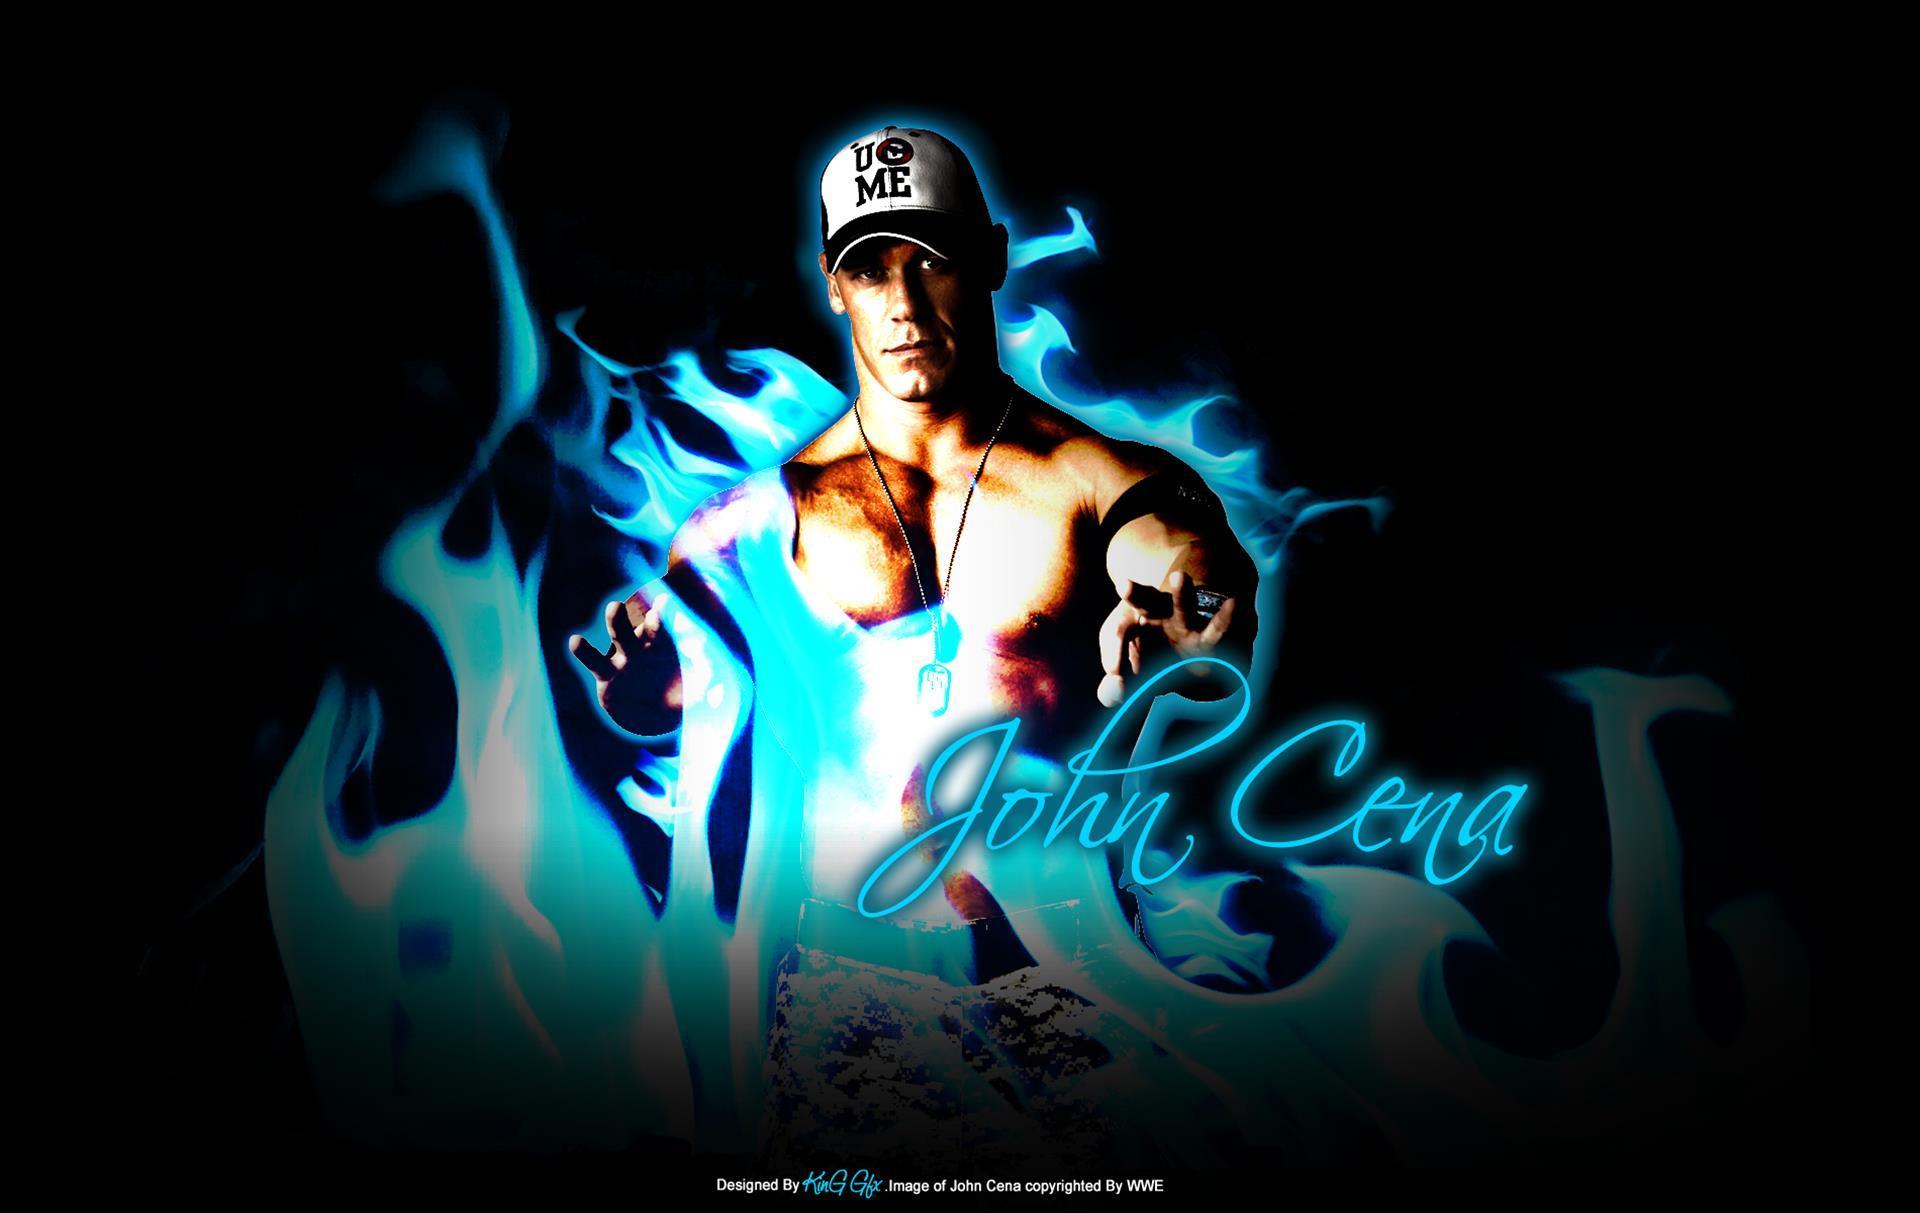 Get awesome John Cena HD images in each new Chrome tab! 